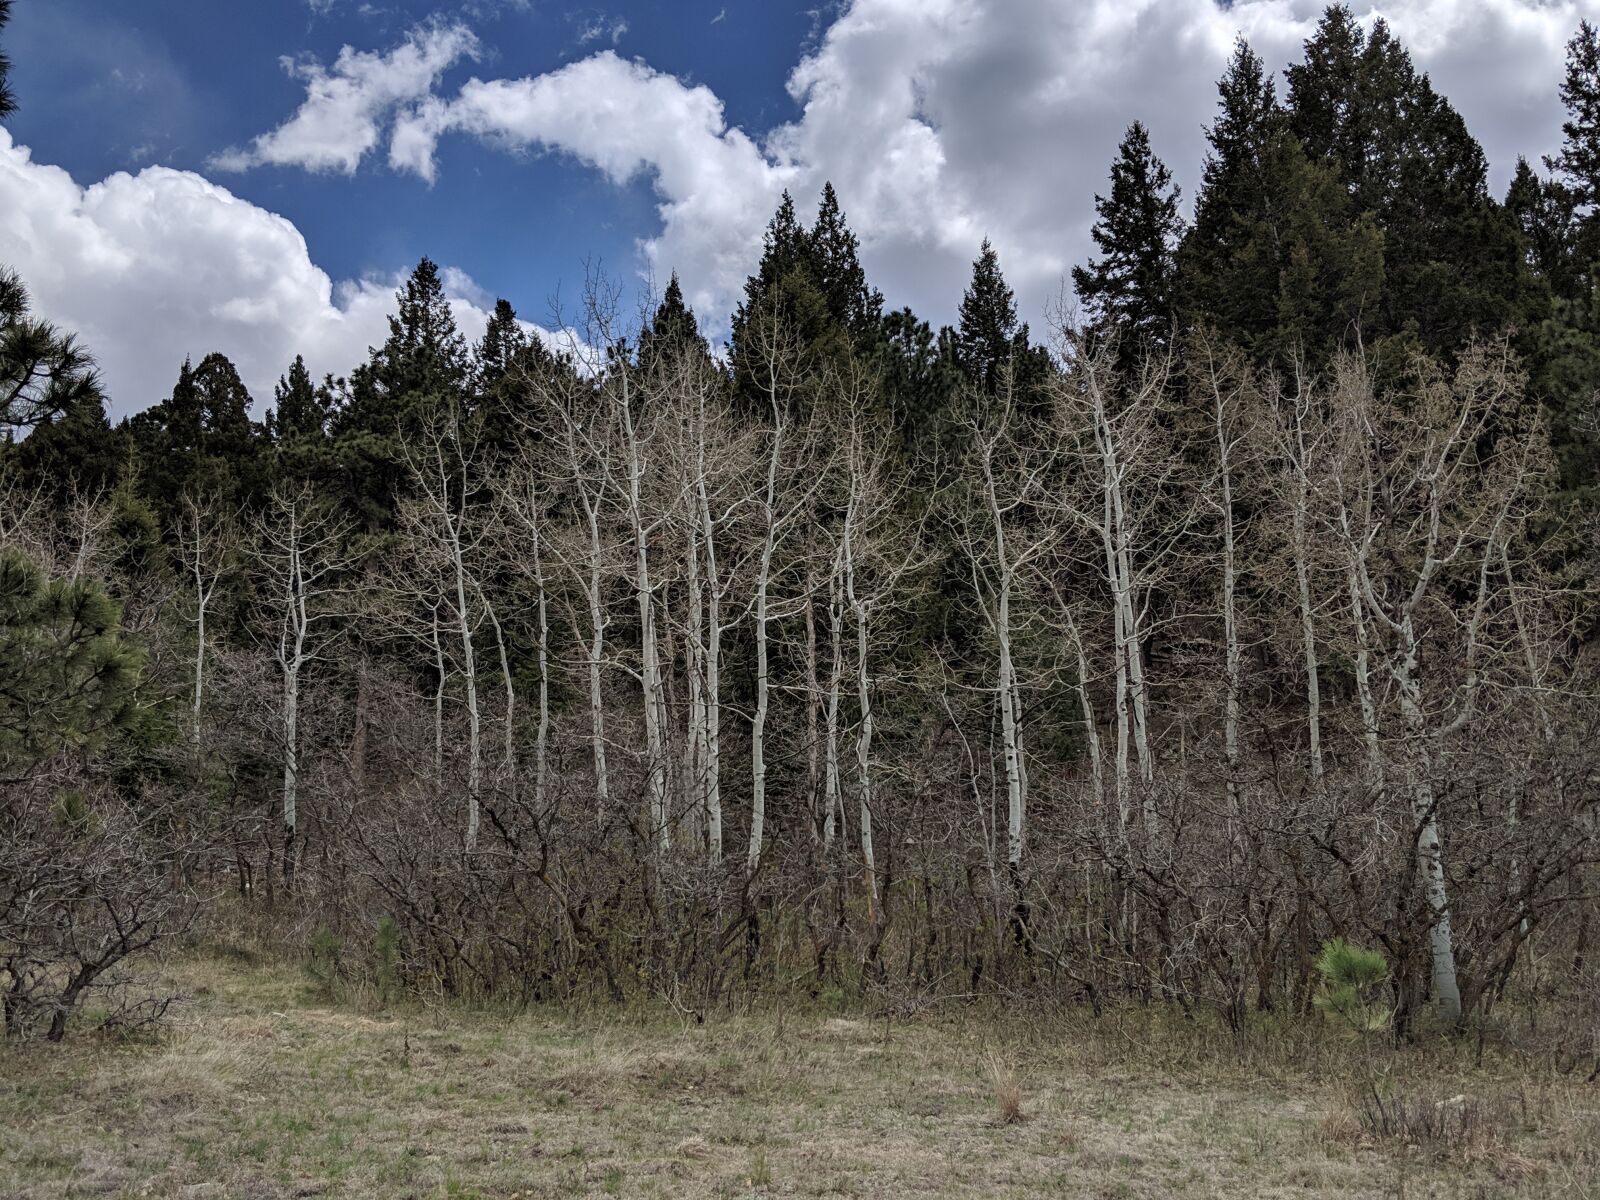 Google Pixel 2 sample photo. Trees, nature, outdoors photography